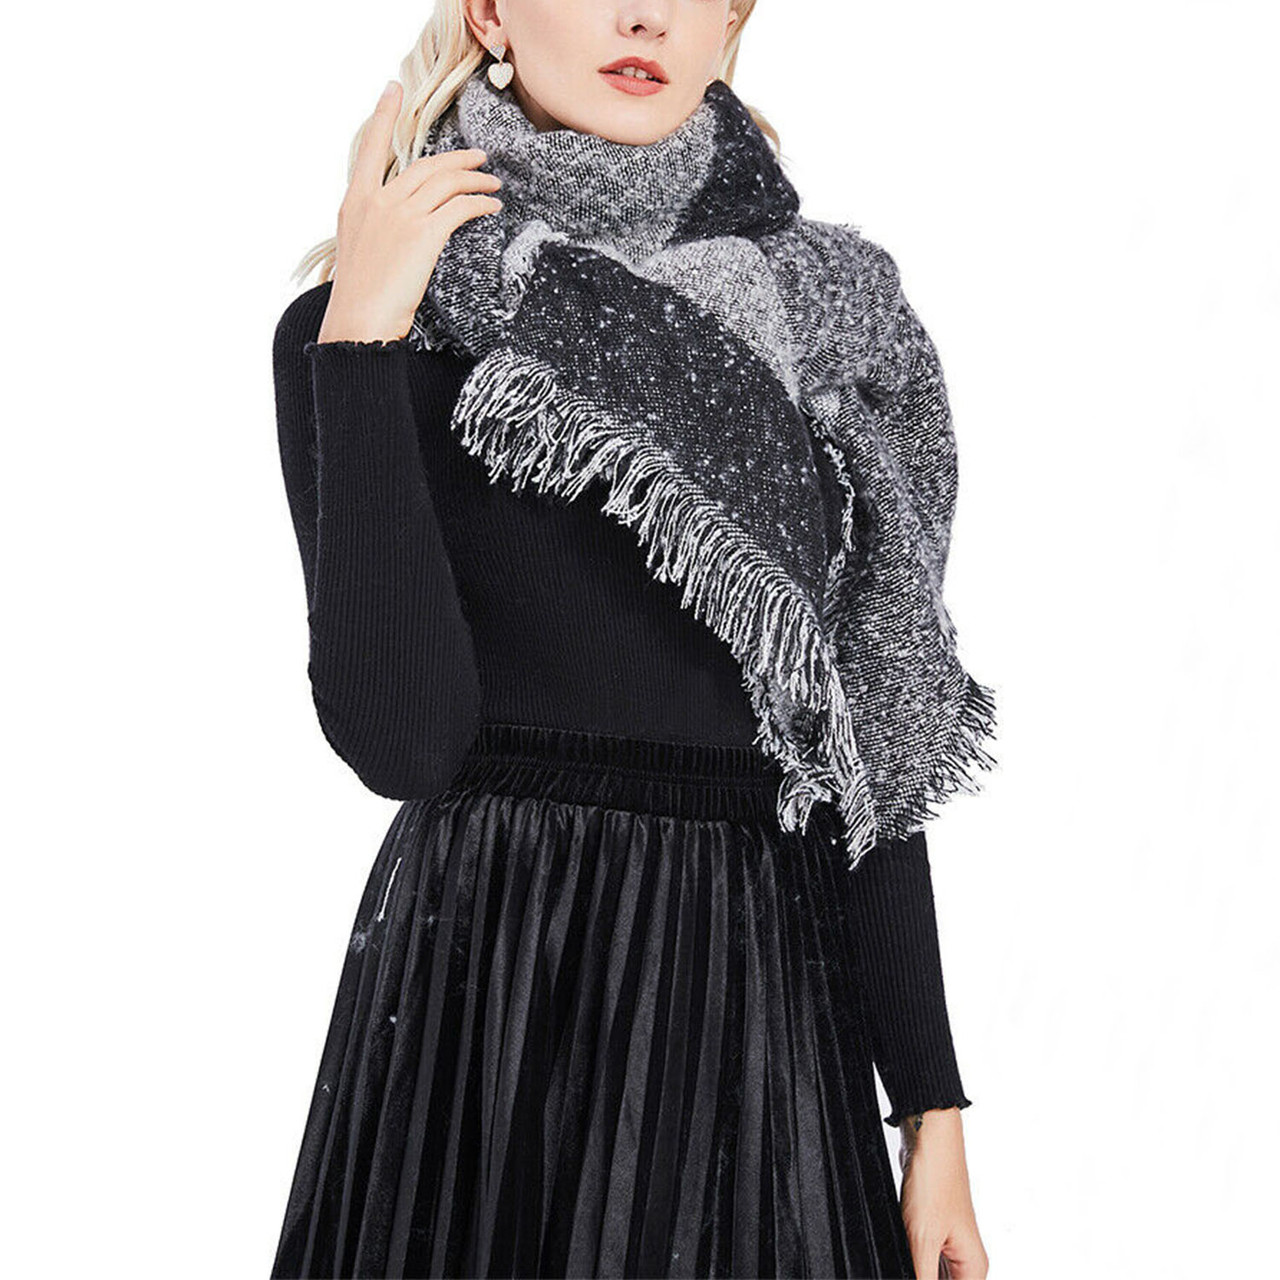 N'Polar™ Women's Knitted Winter Scarves product image